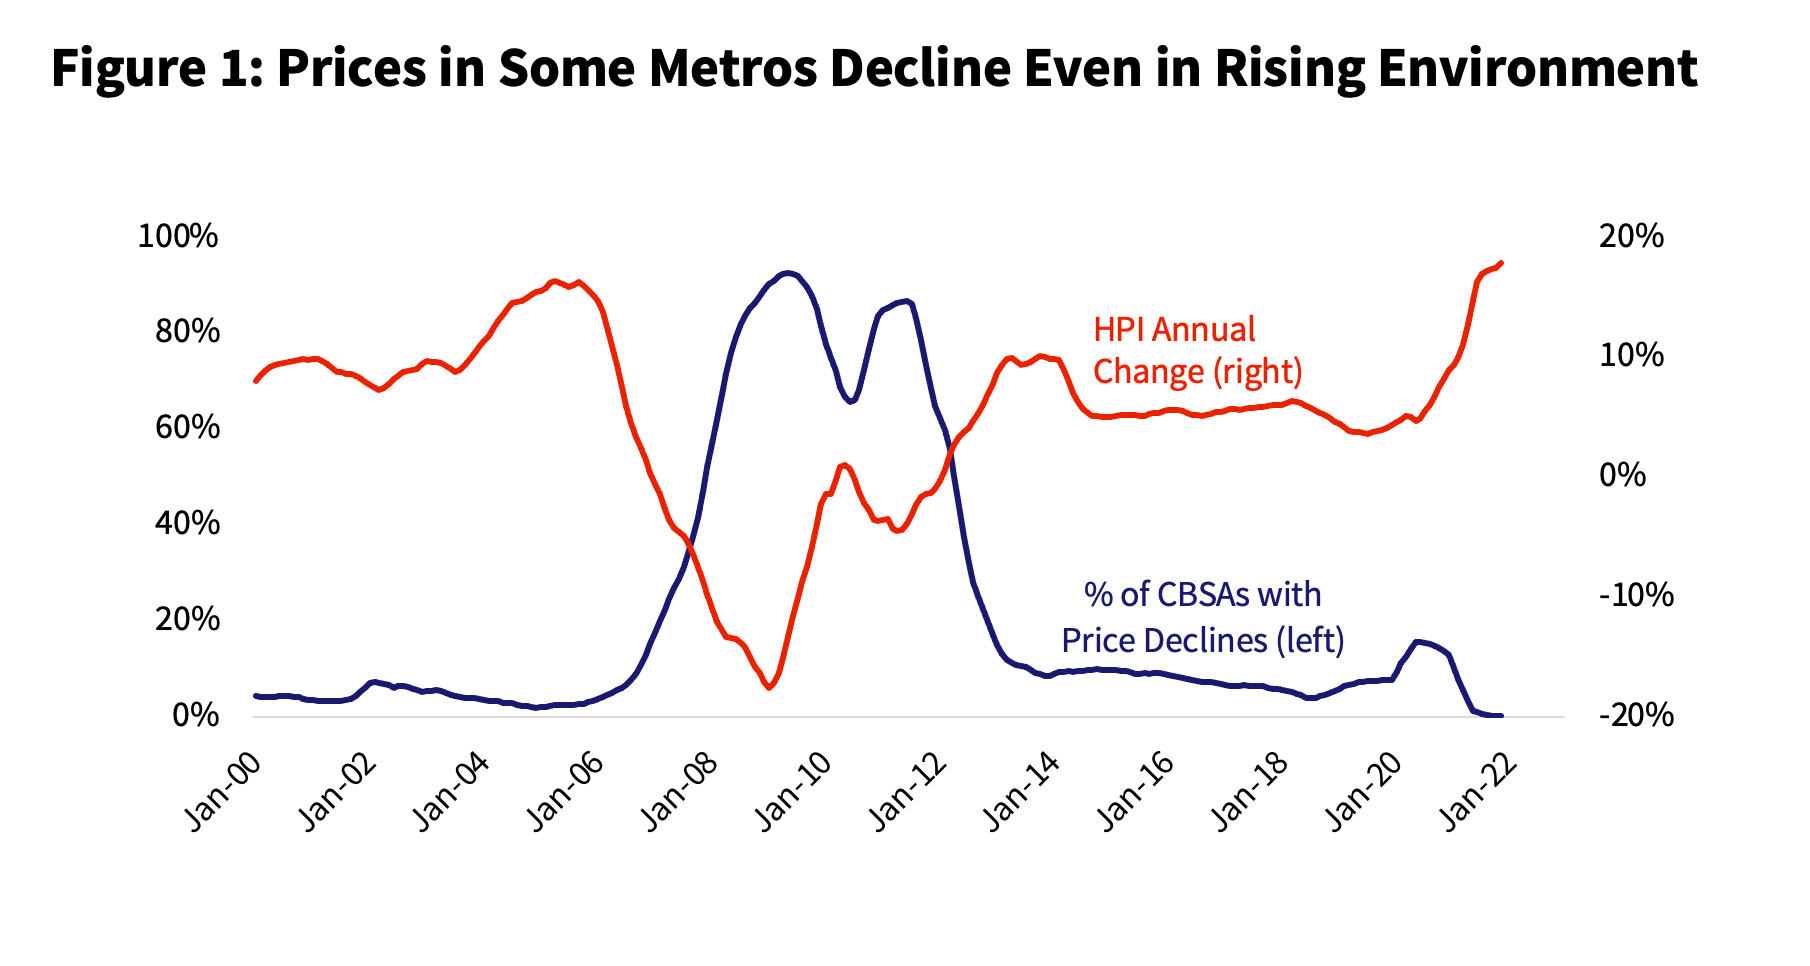 Figure 1: Prices in Some Metros Decline Even in Rising Environment